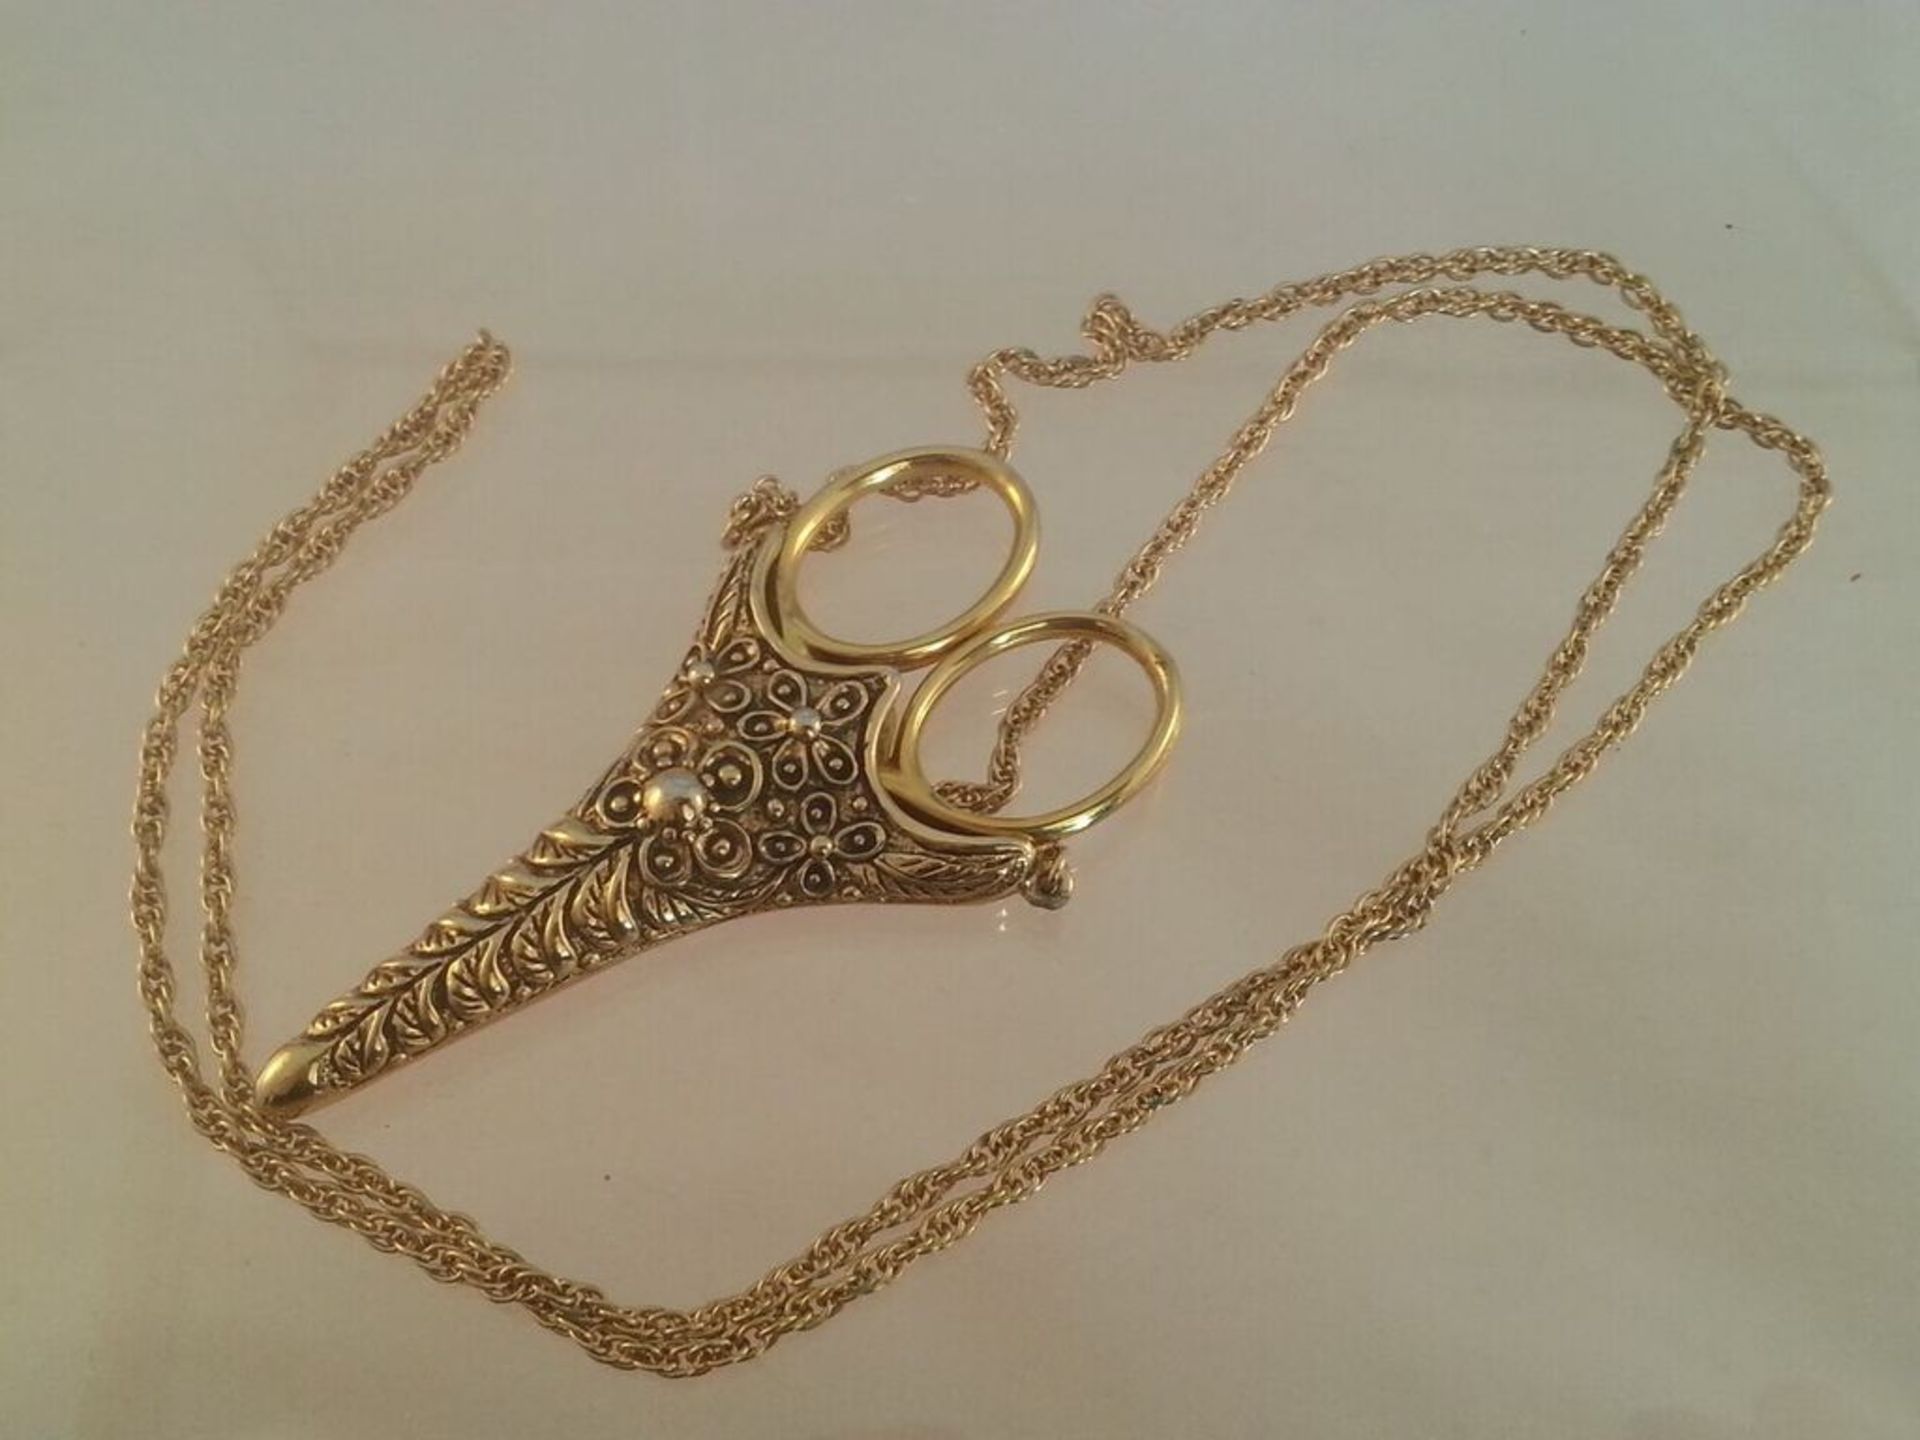 Vintage Italian seamstress scissors with case on chain, the chain length is approx 70cm. A beautiful